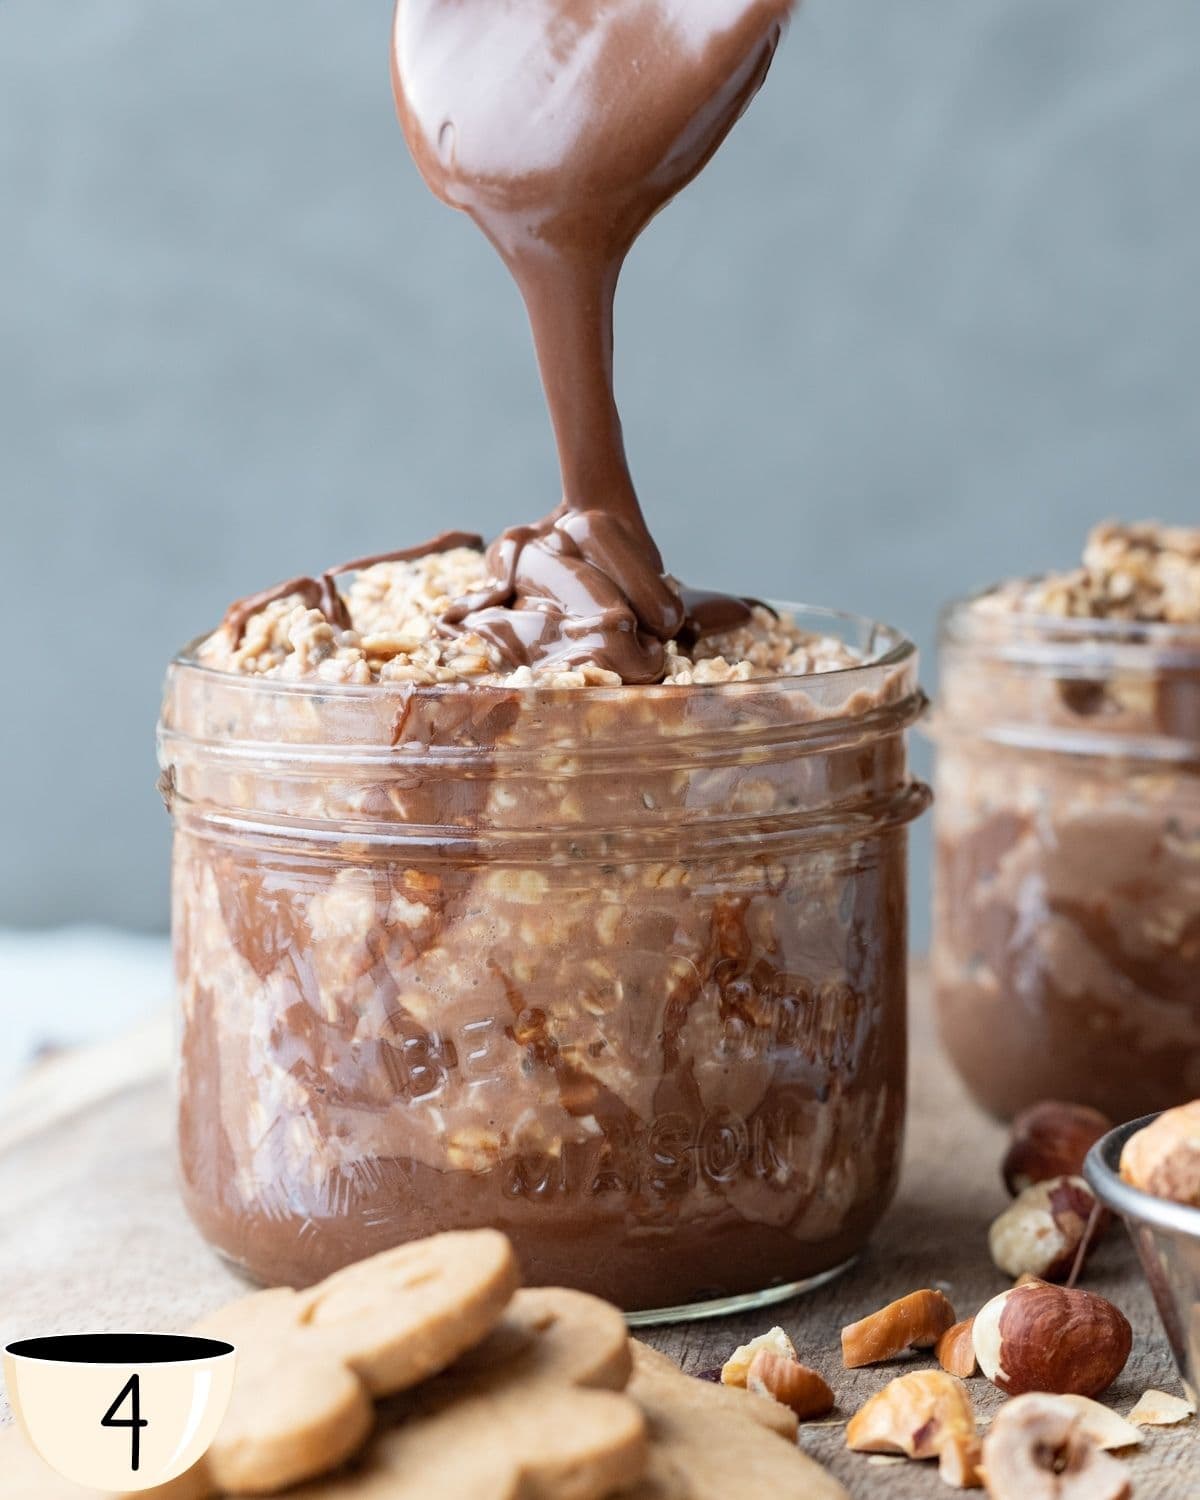 Pouring creamy Nutella onto a jar of overnight oats with hazelnuts, creating a luscious layer on top.